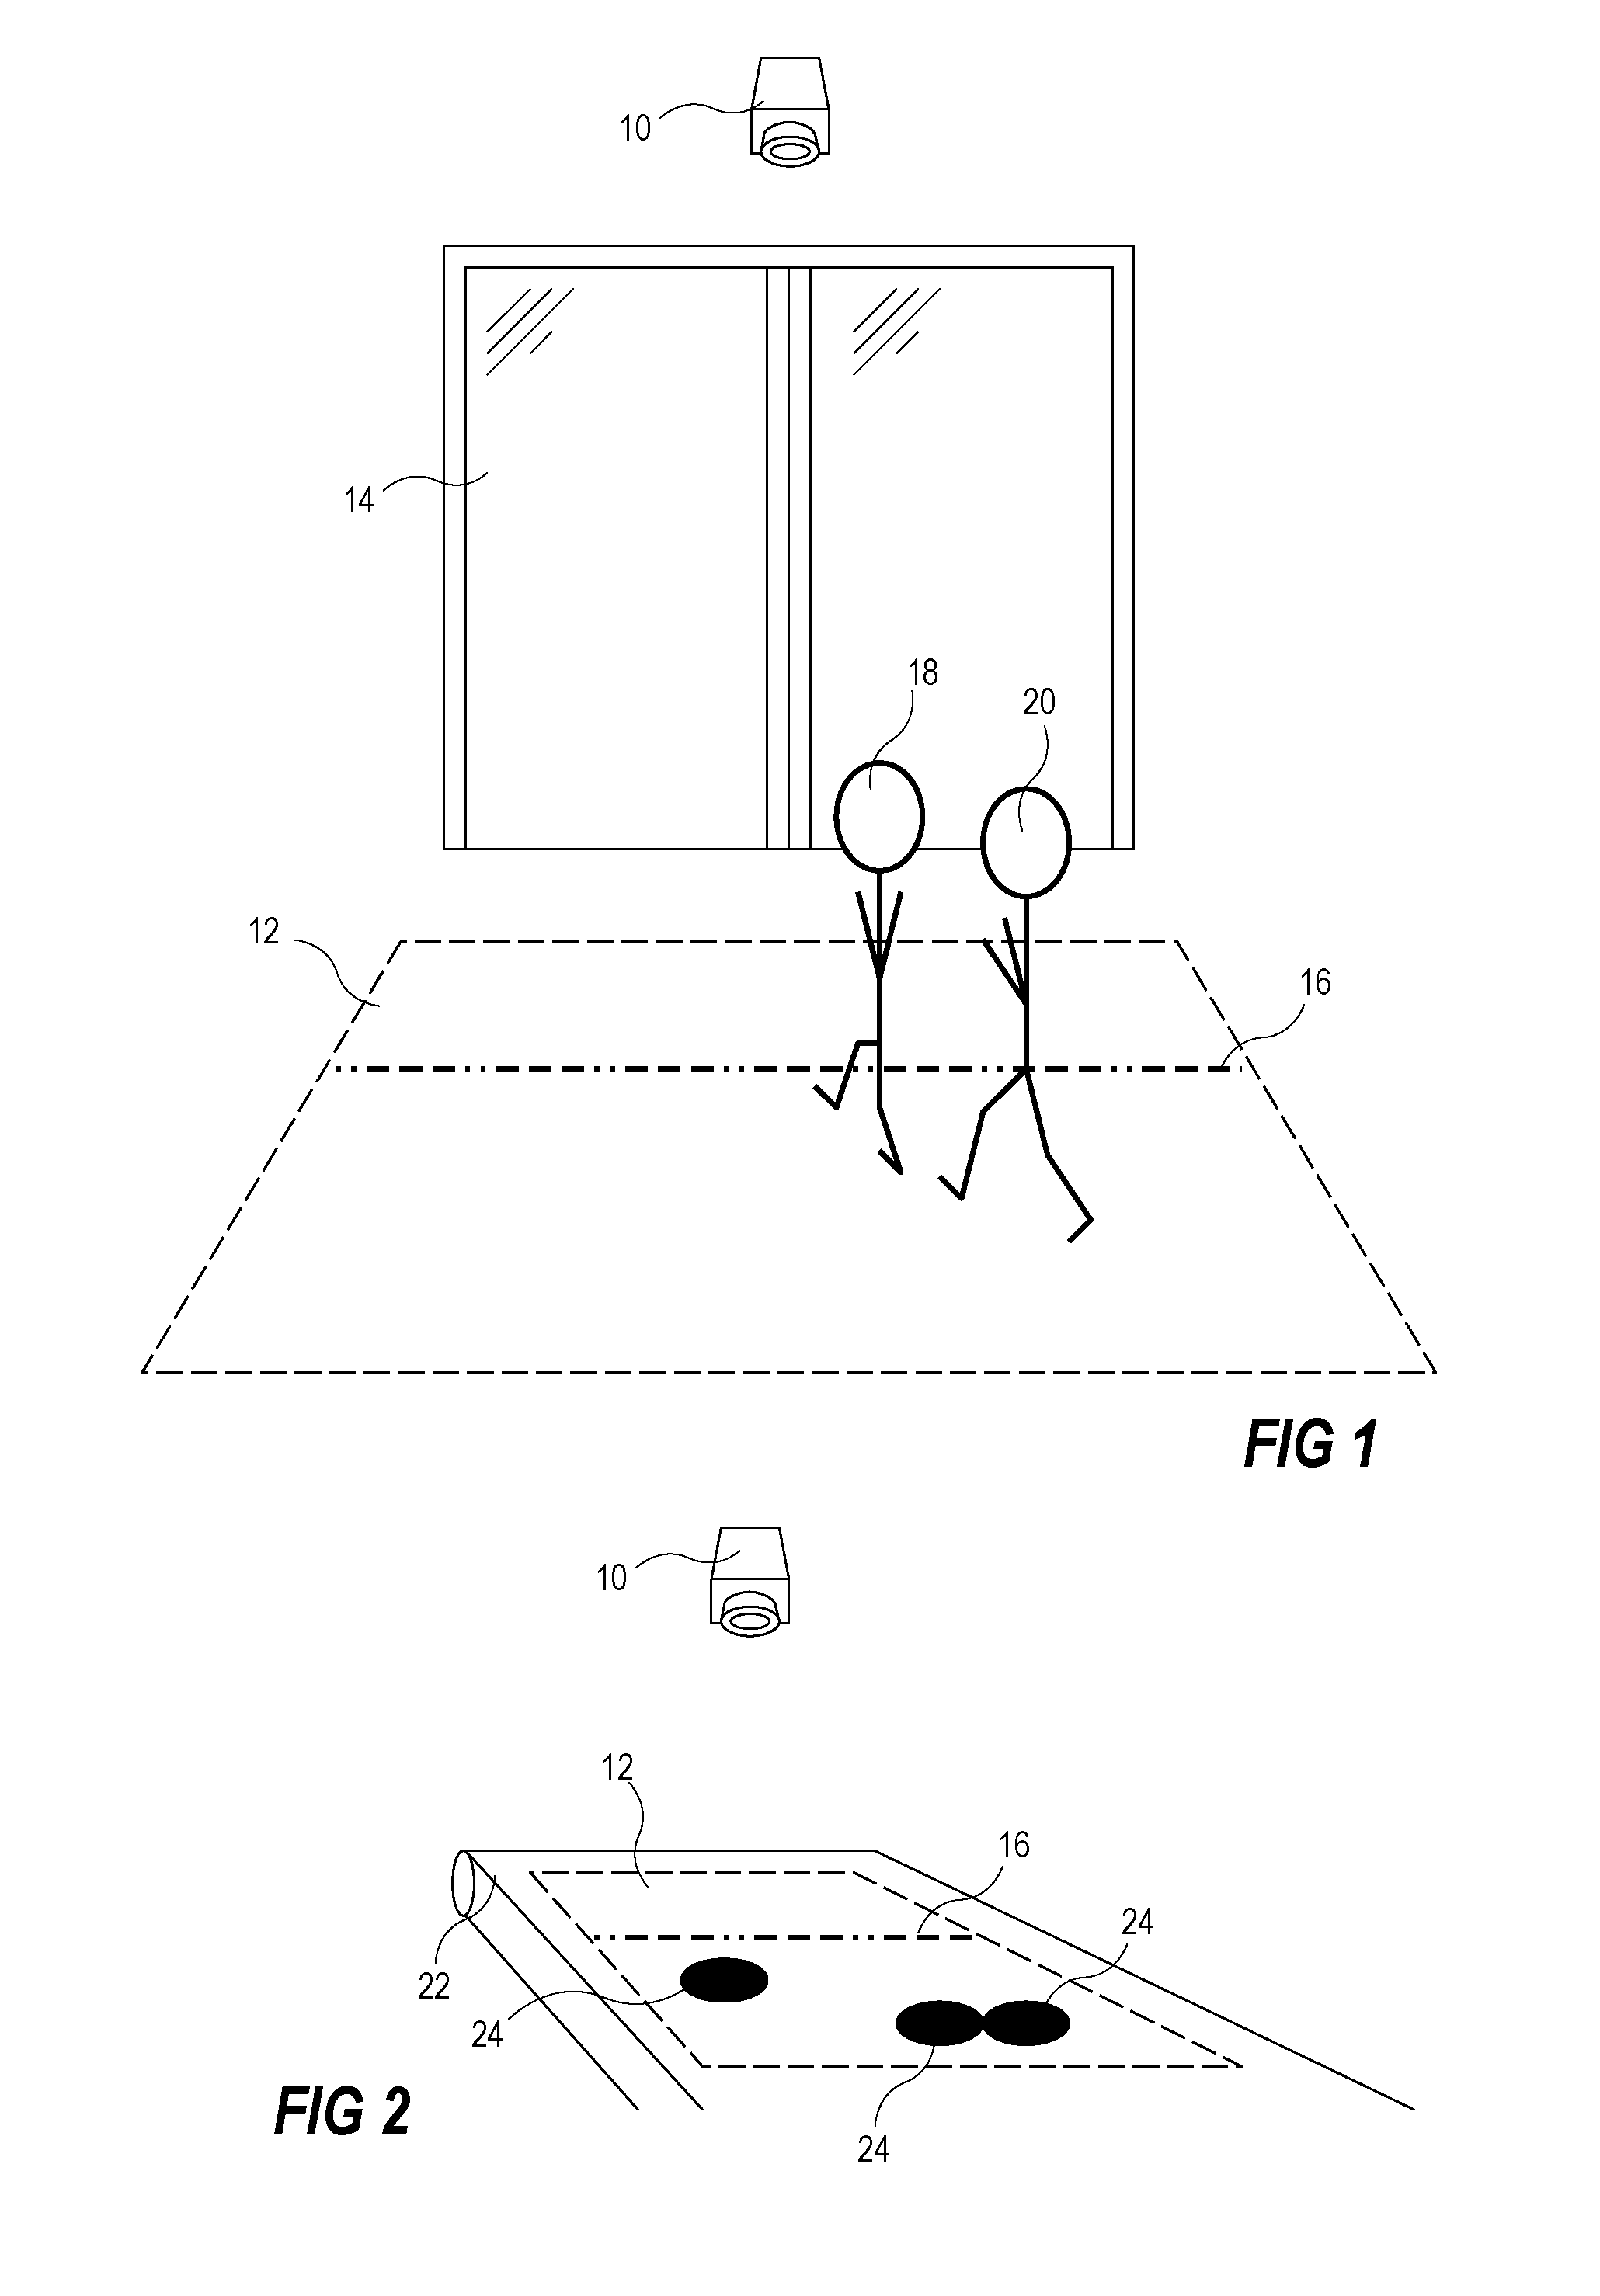 Object counter and method for counting objects